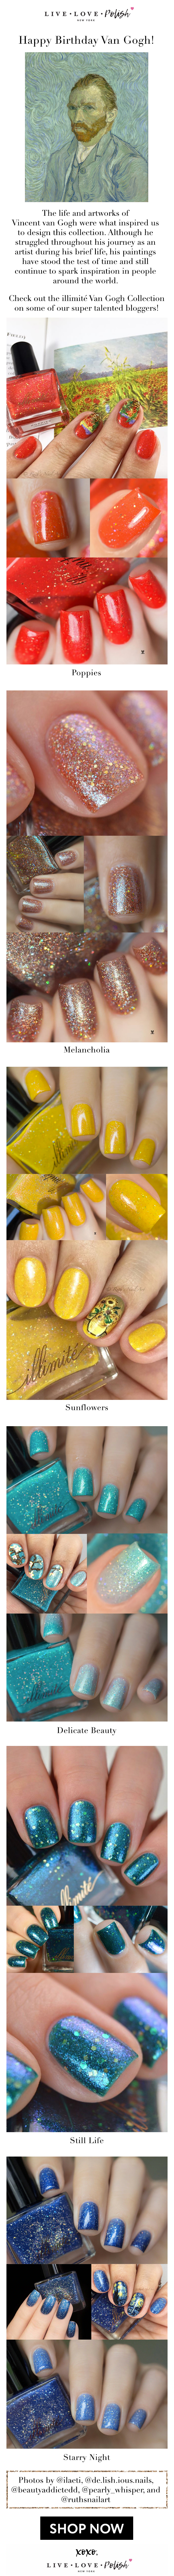 An email dedicated to Van Gogh’s birthday from Live Love Polish